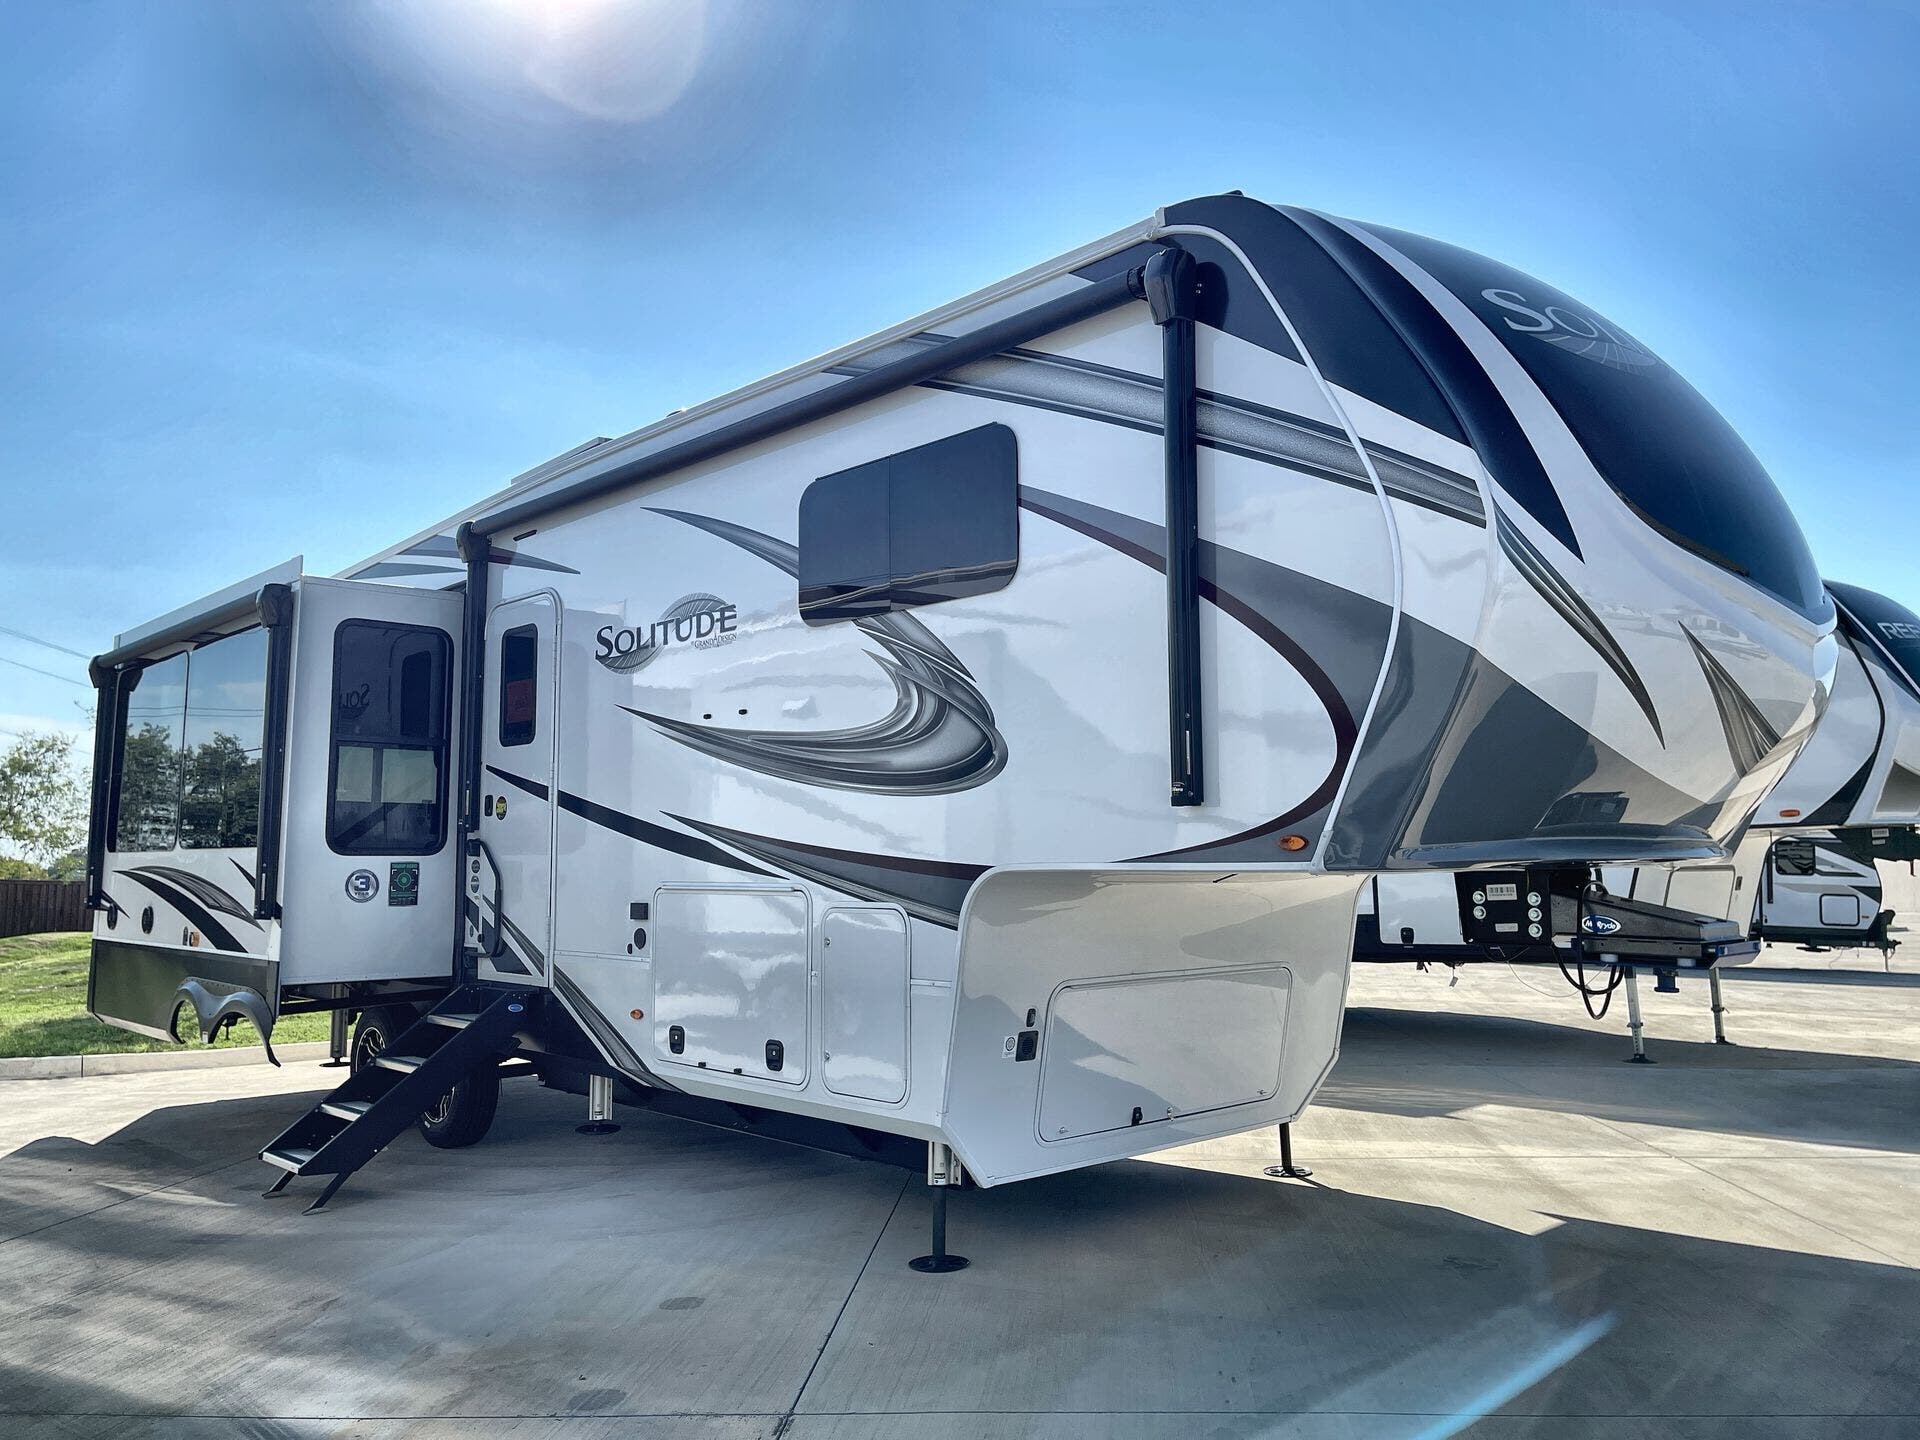 2023 Grand Design Solitude 310GKR RV for Sale in Rockwall, TX 75087 99270 Classifieds